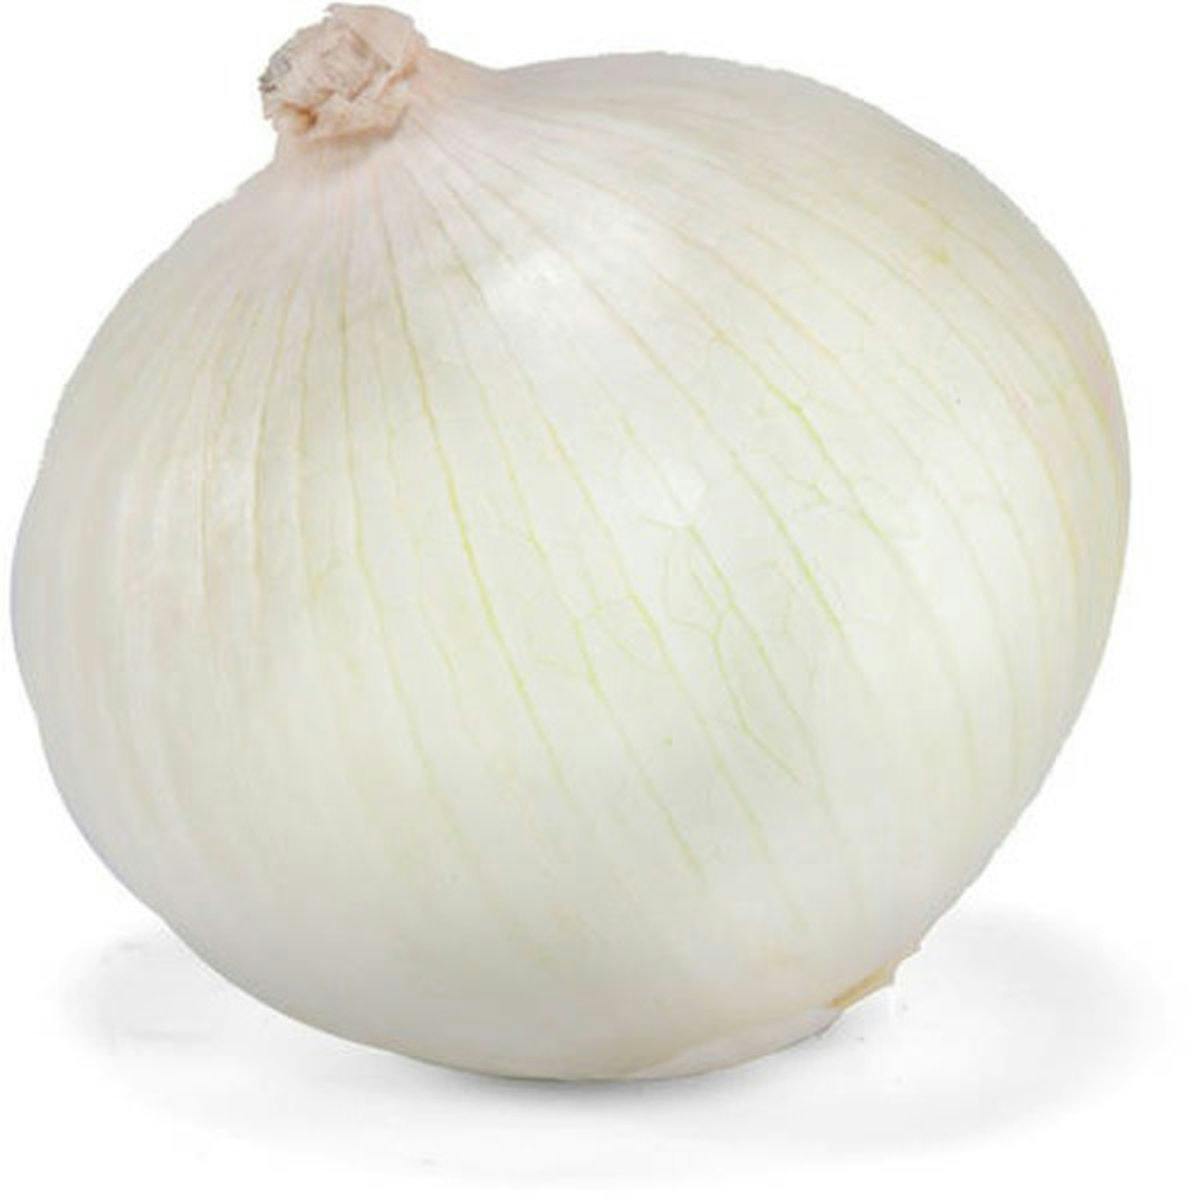 white onion (sliced thinly)